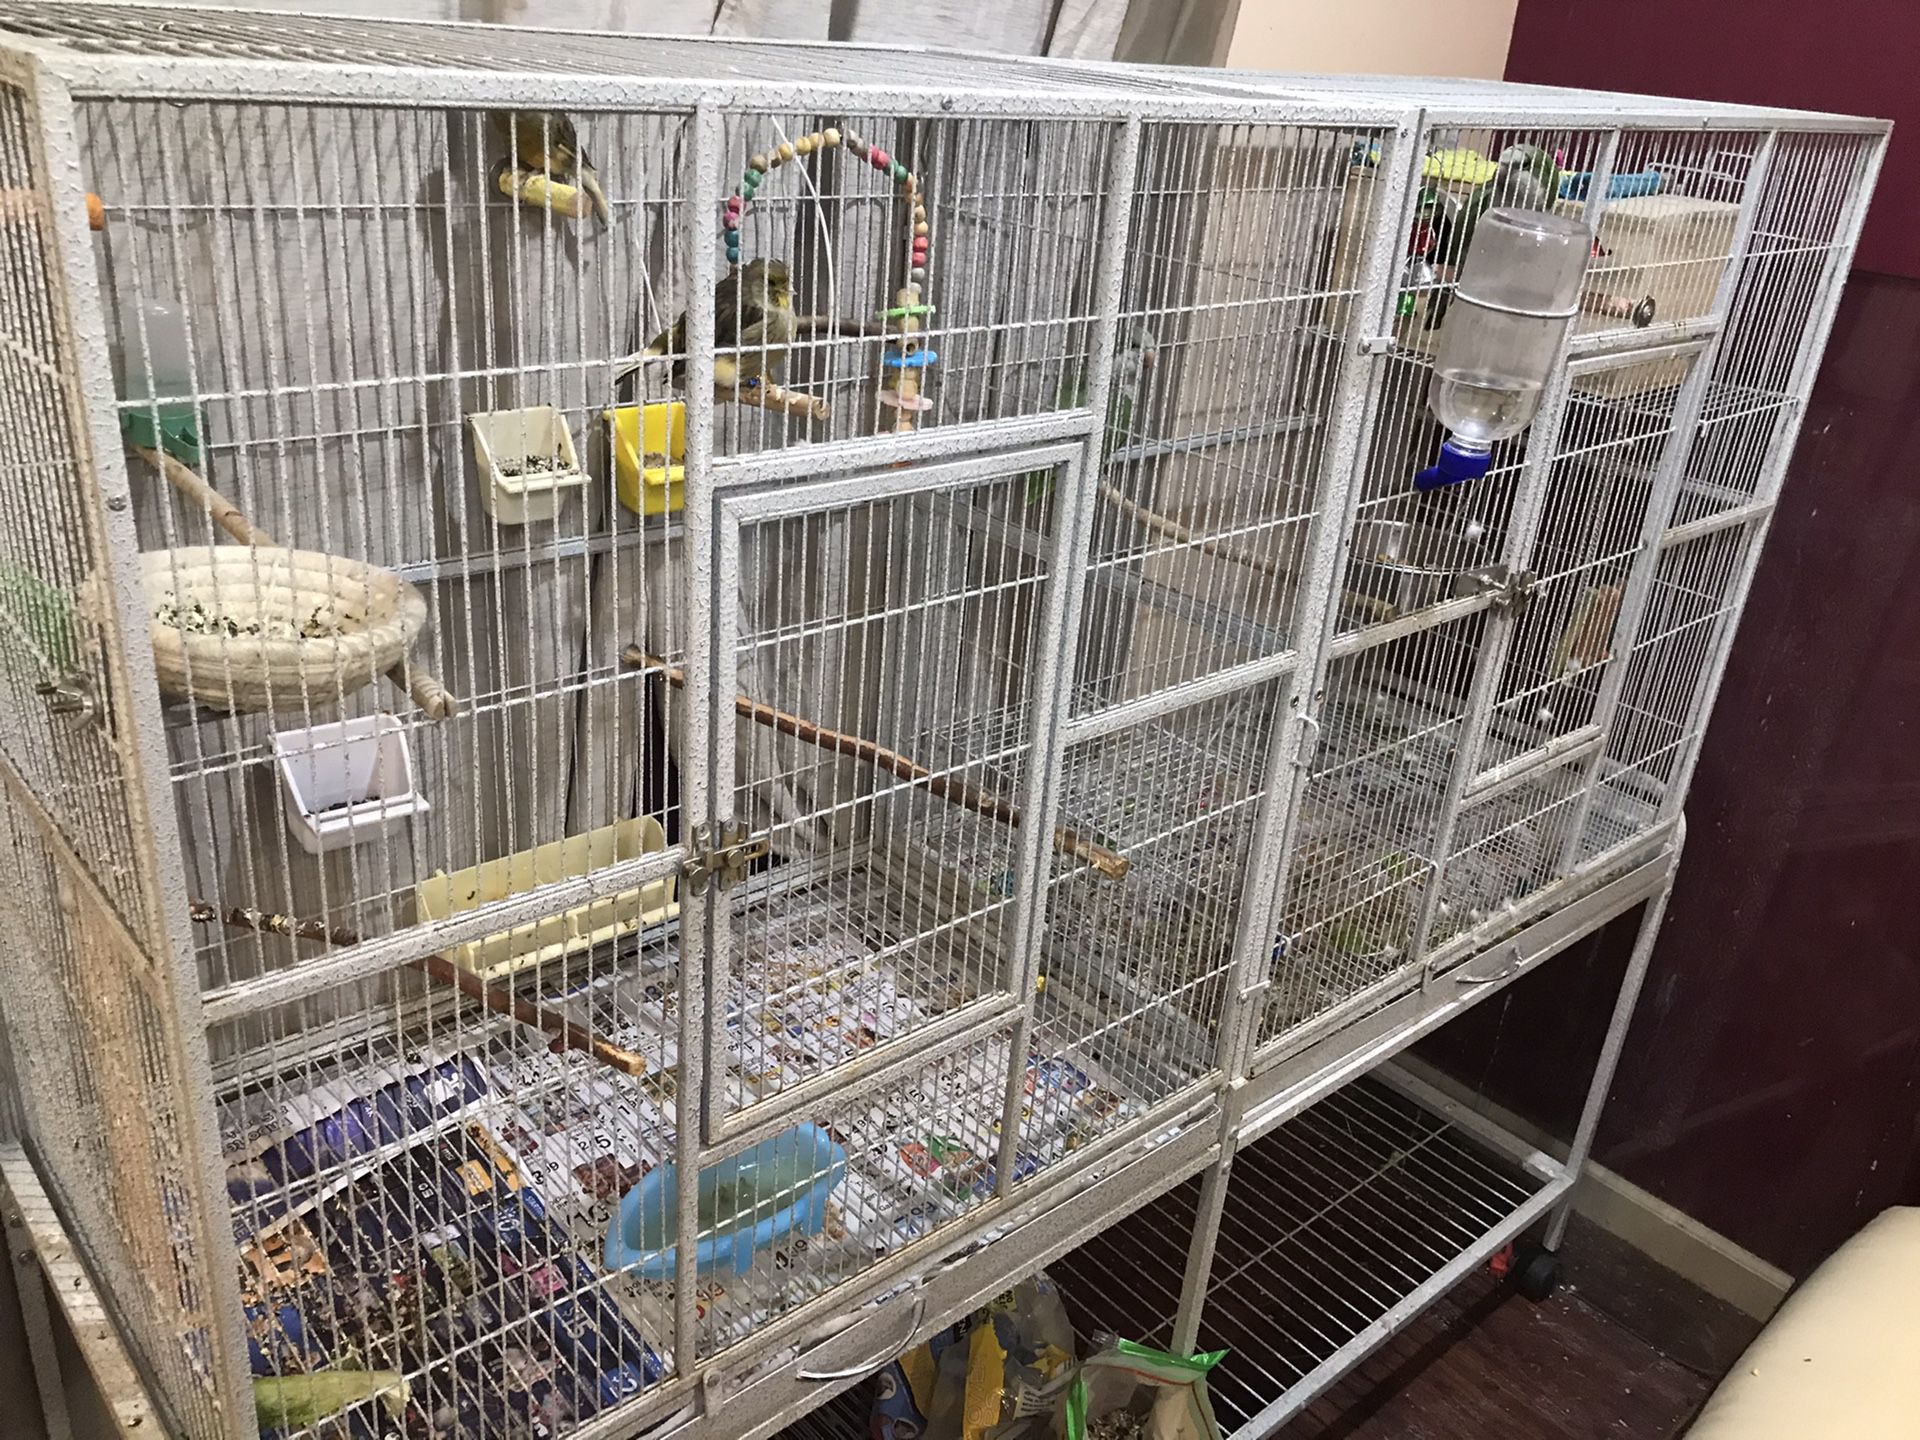 It’s price 350$ . Now hot price for 250$ , No bird 2 big cage for birds connect together in huge cage used for f heights 55 inch width 30 inch long 19